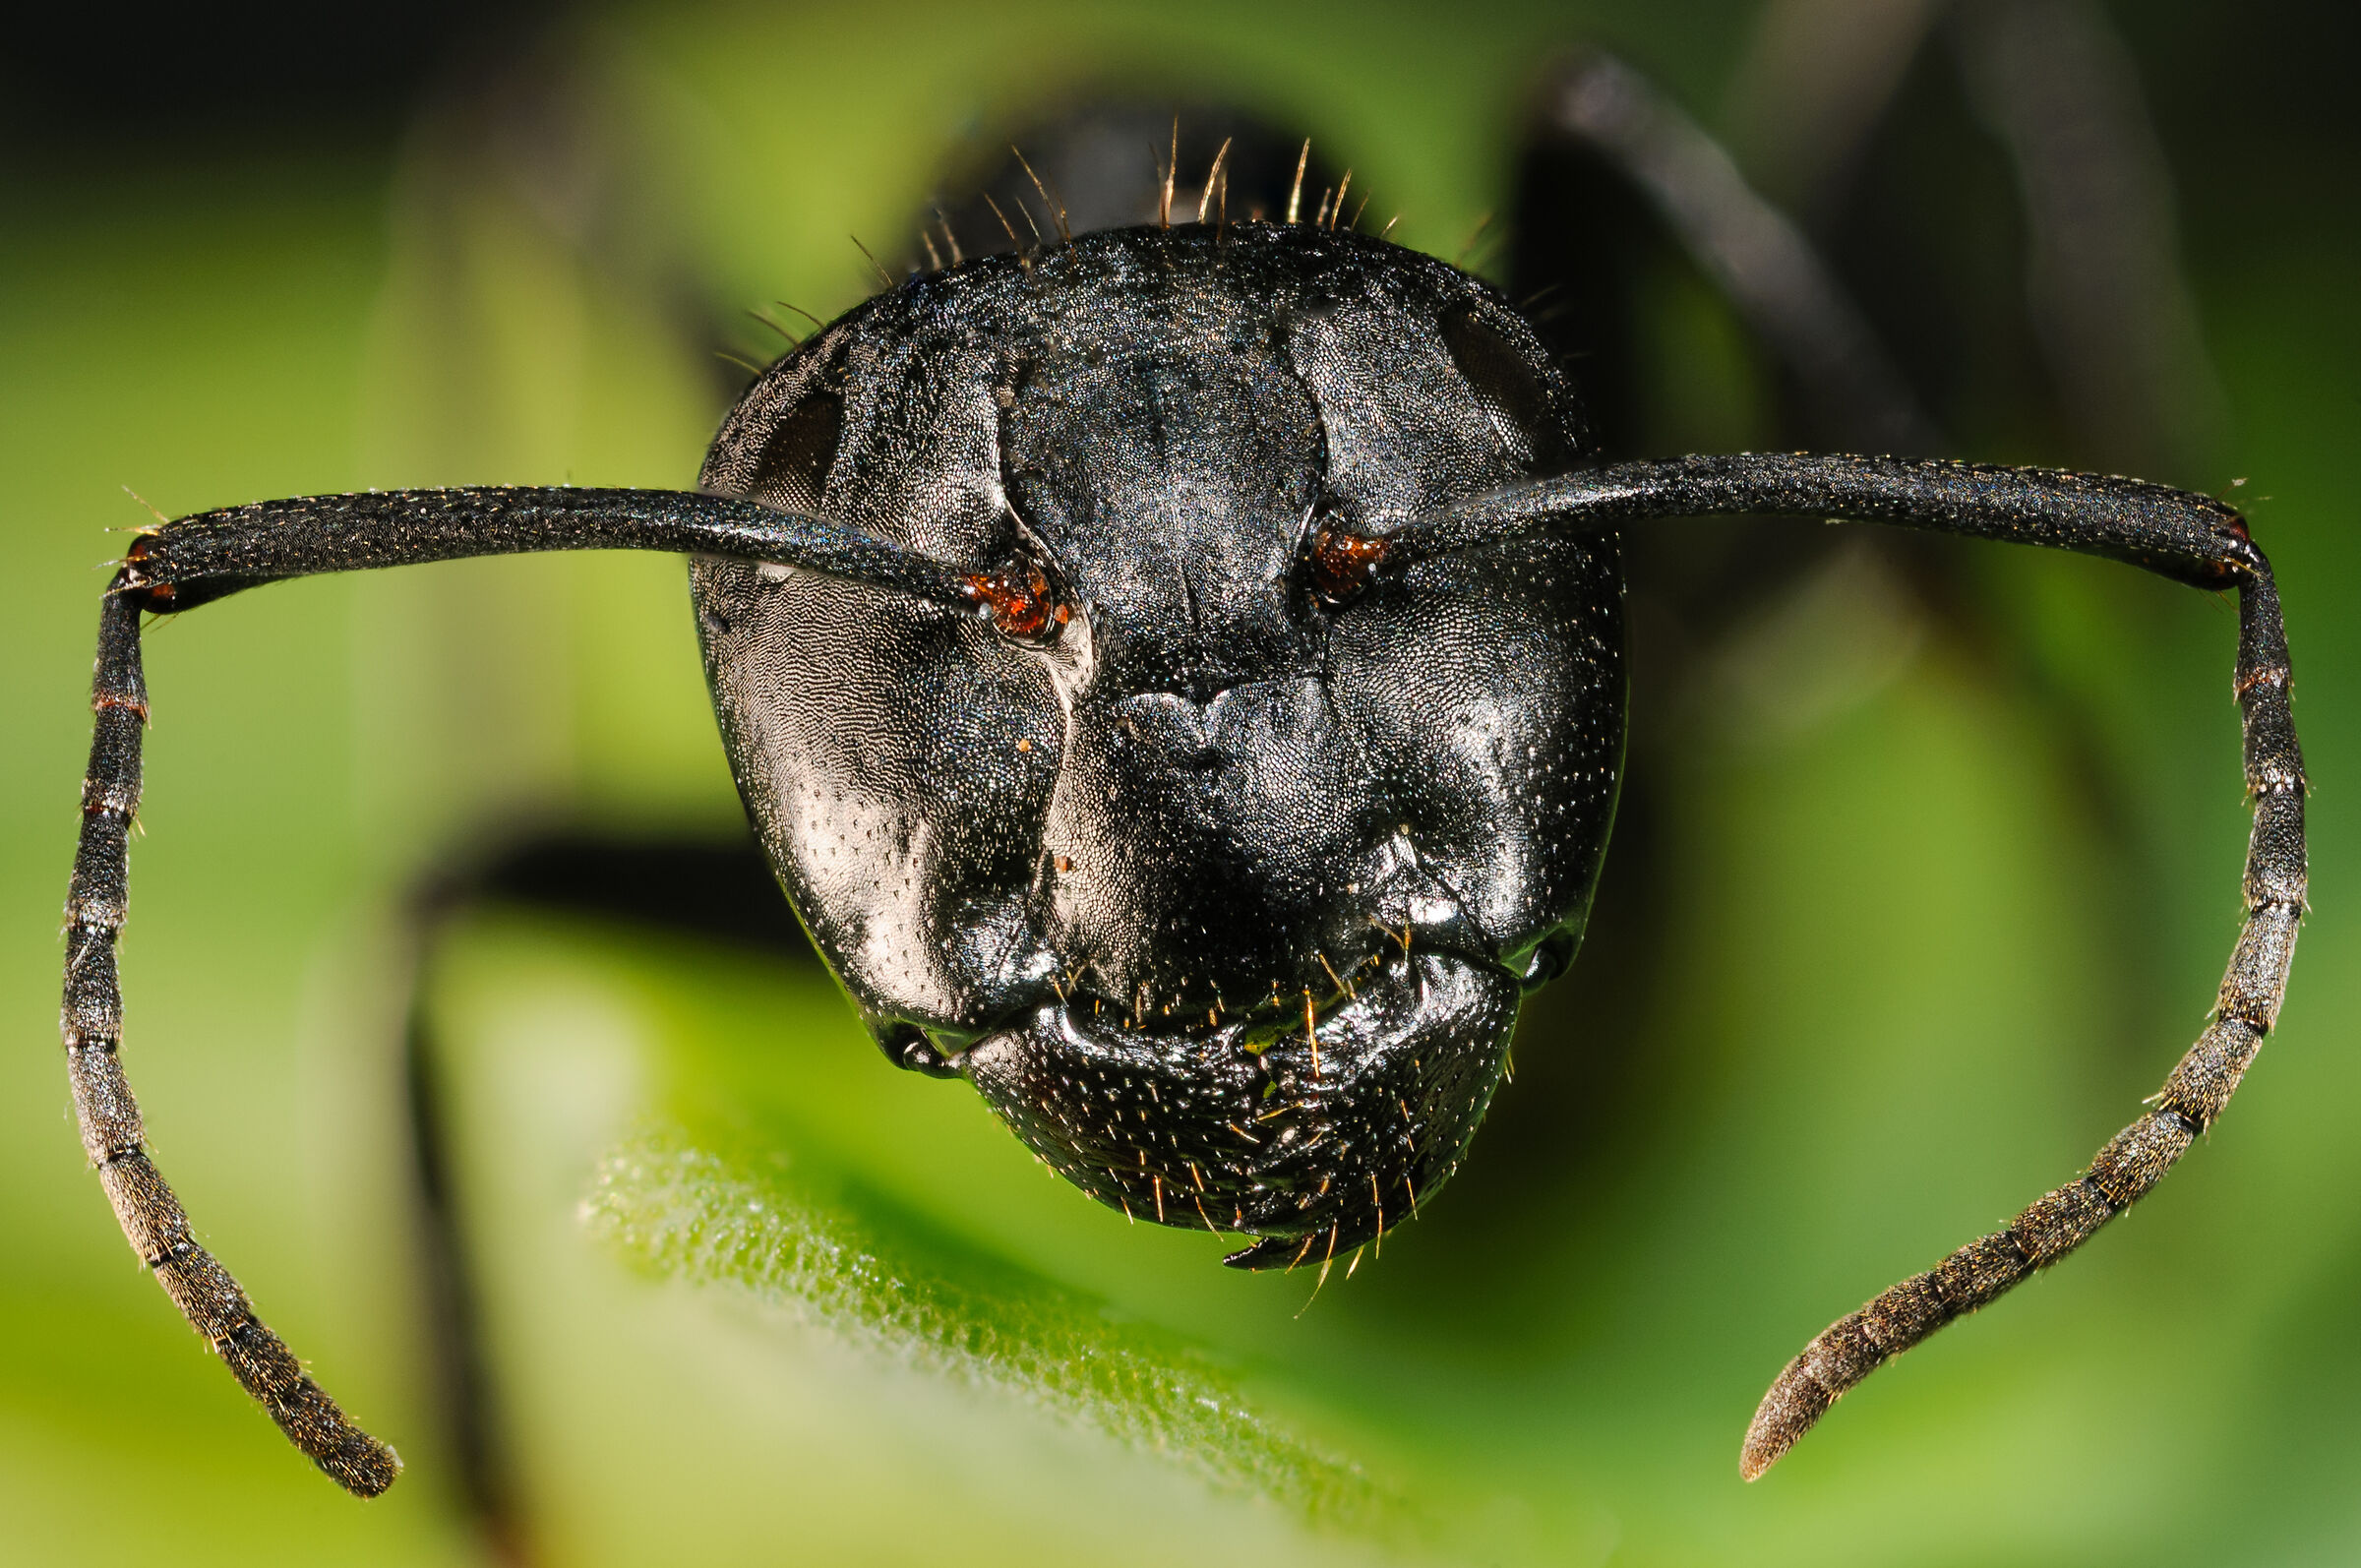 Portrait of an ant...